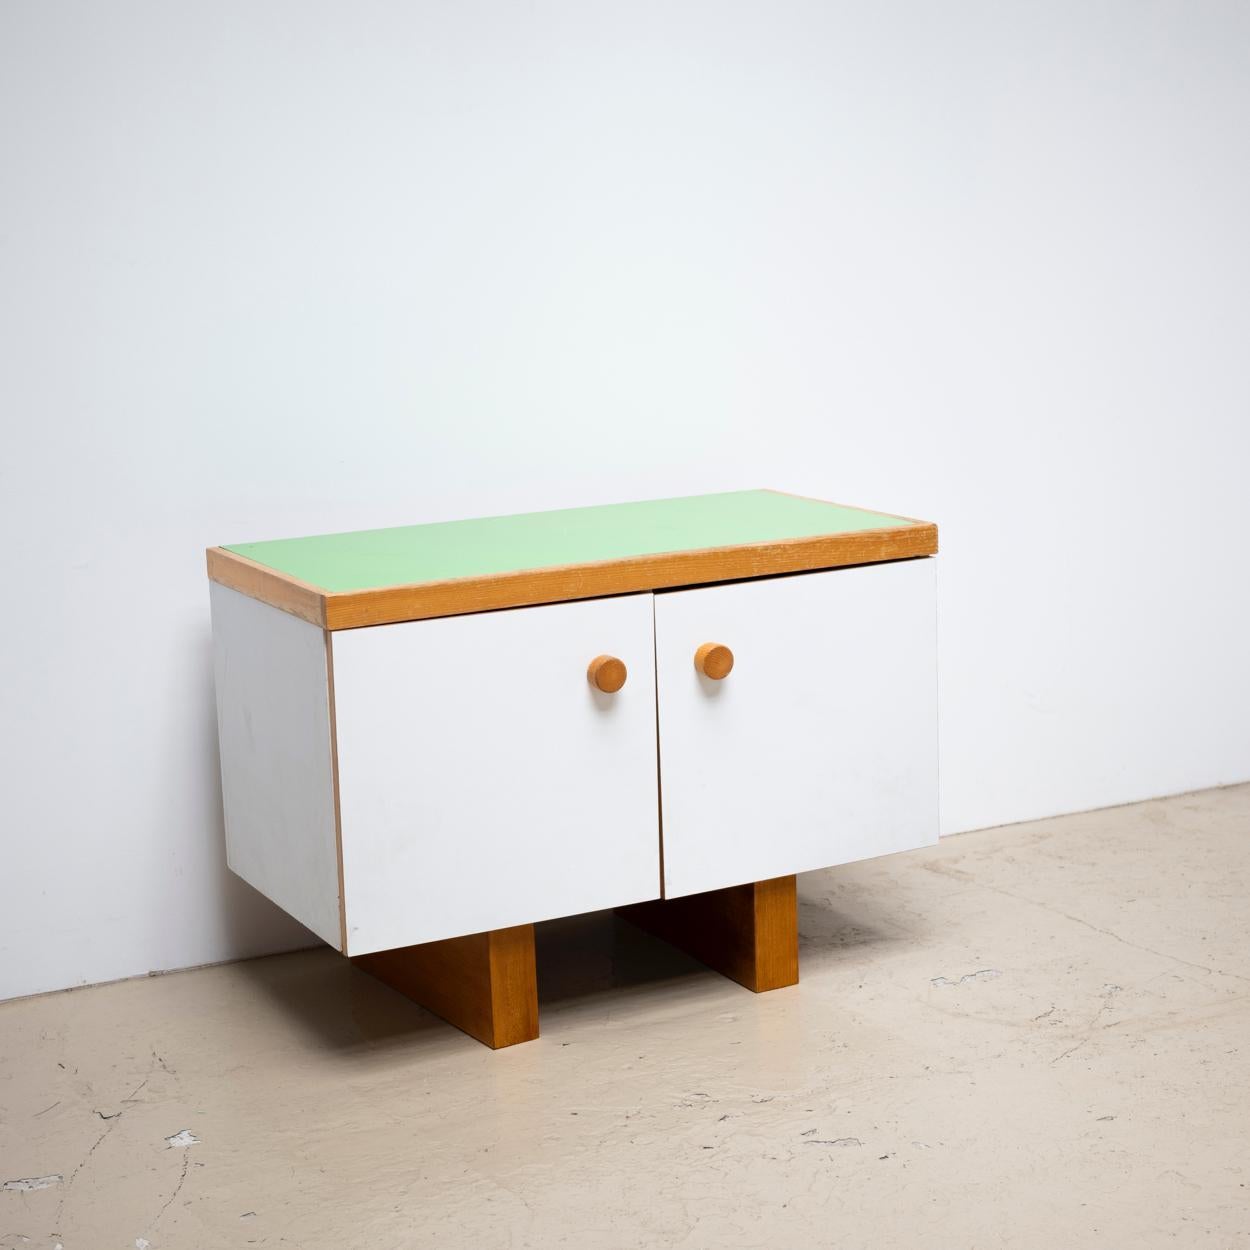 French Charlotte Perriand Side Board from Les Arcs, 2 Doors, Green Top For Sale